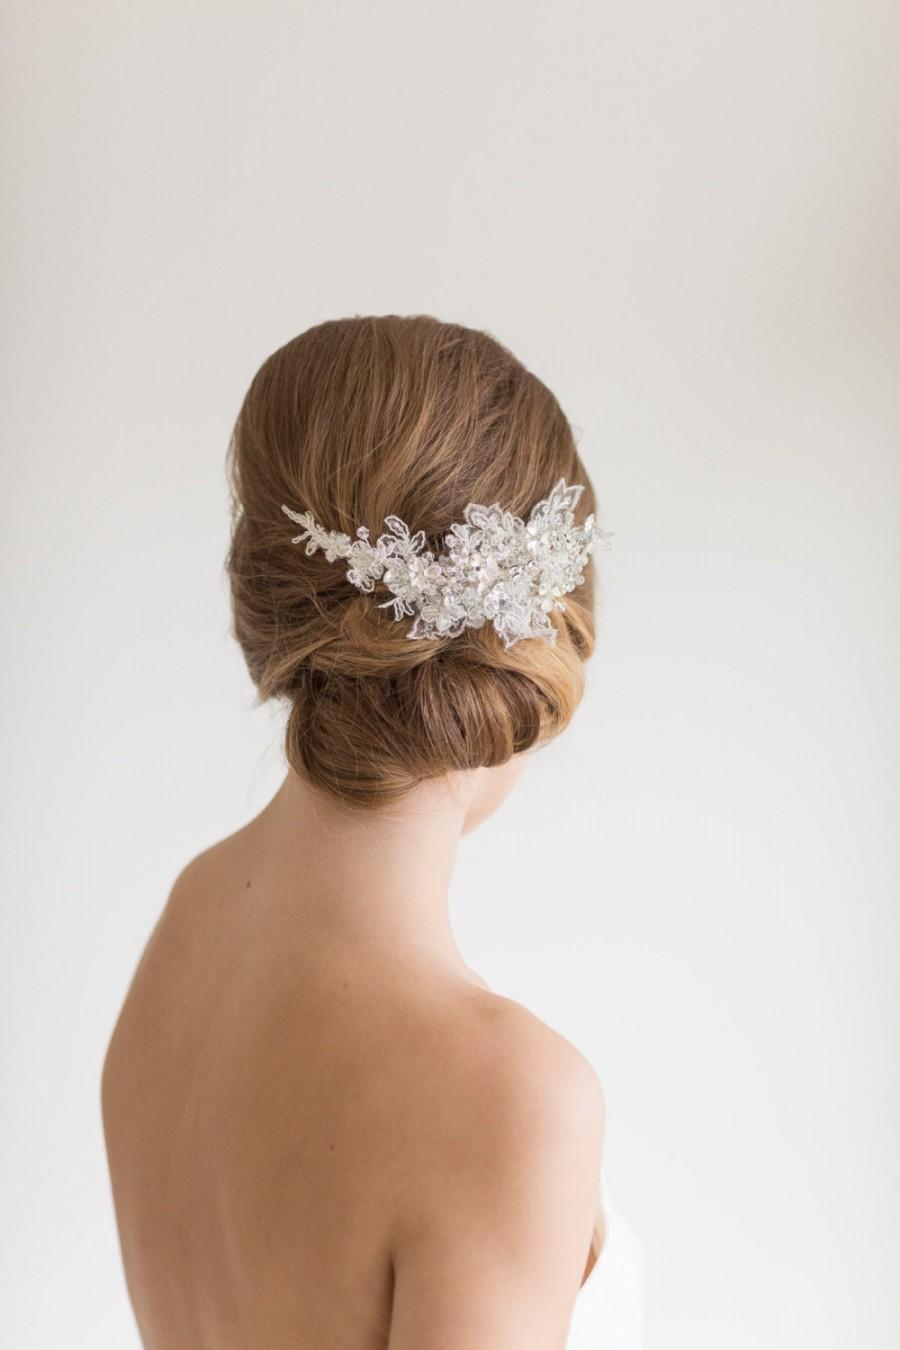 Wedding - Lace Bridal Headpiece,  Crystal and lace Hair Comb, Wedding Hair Accessory